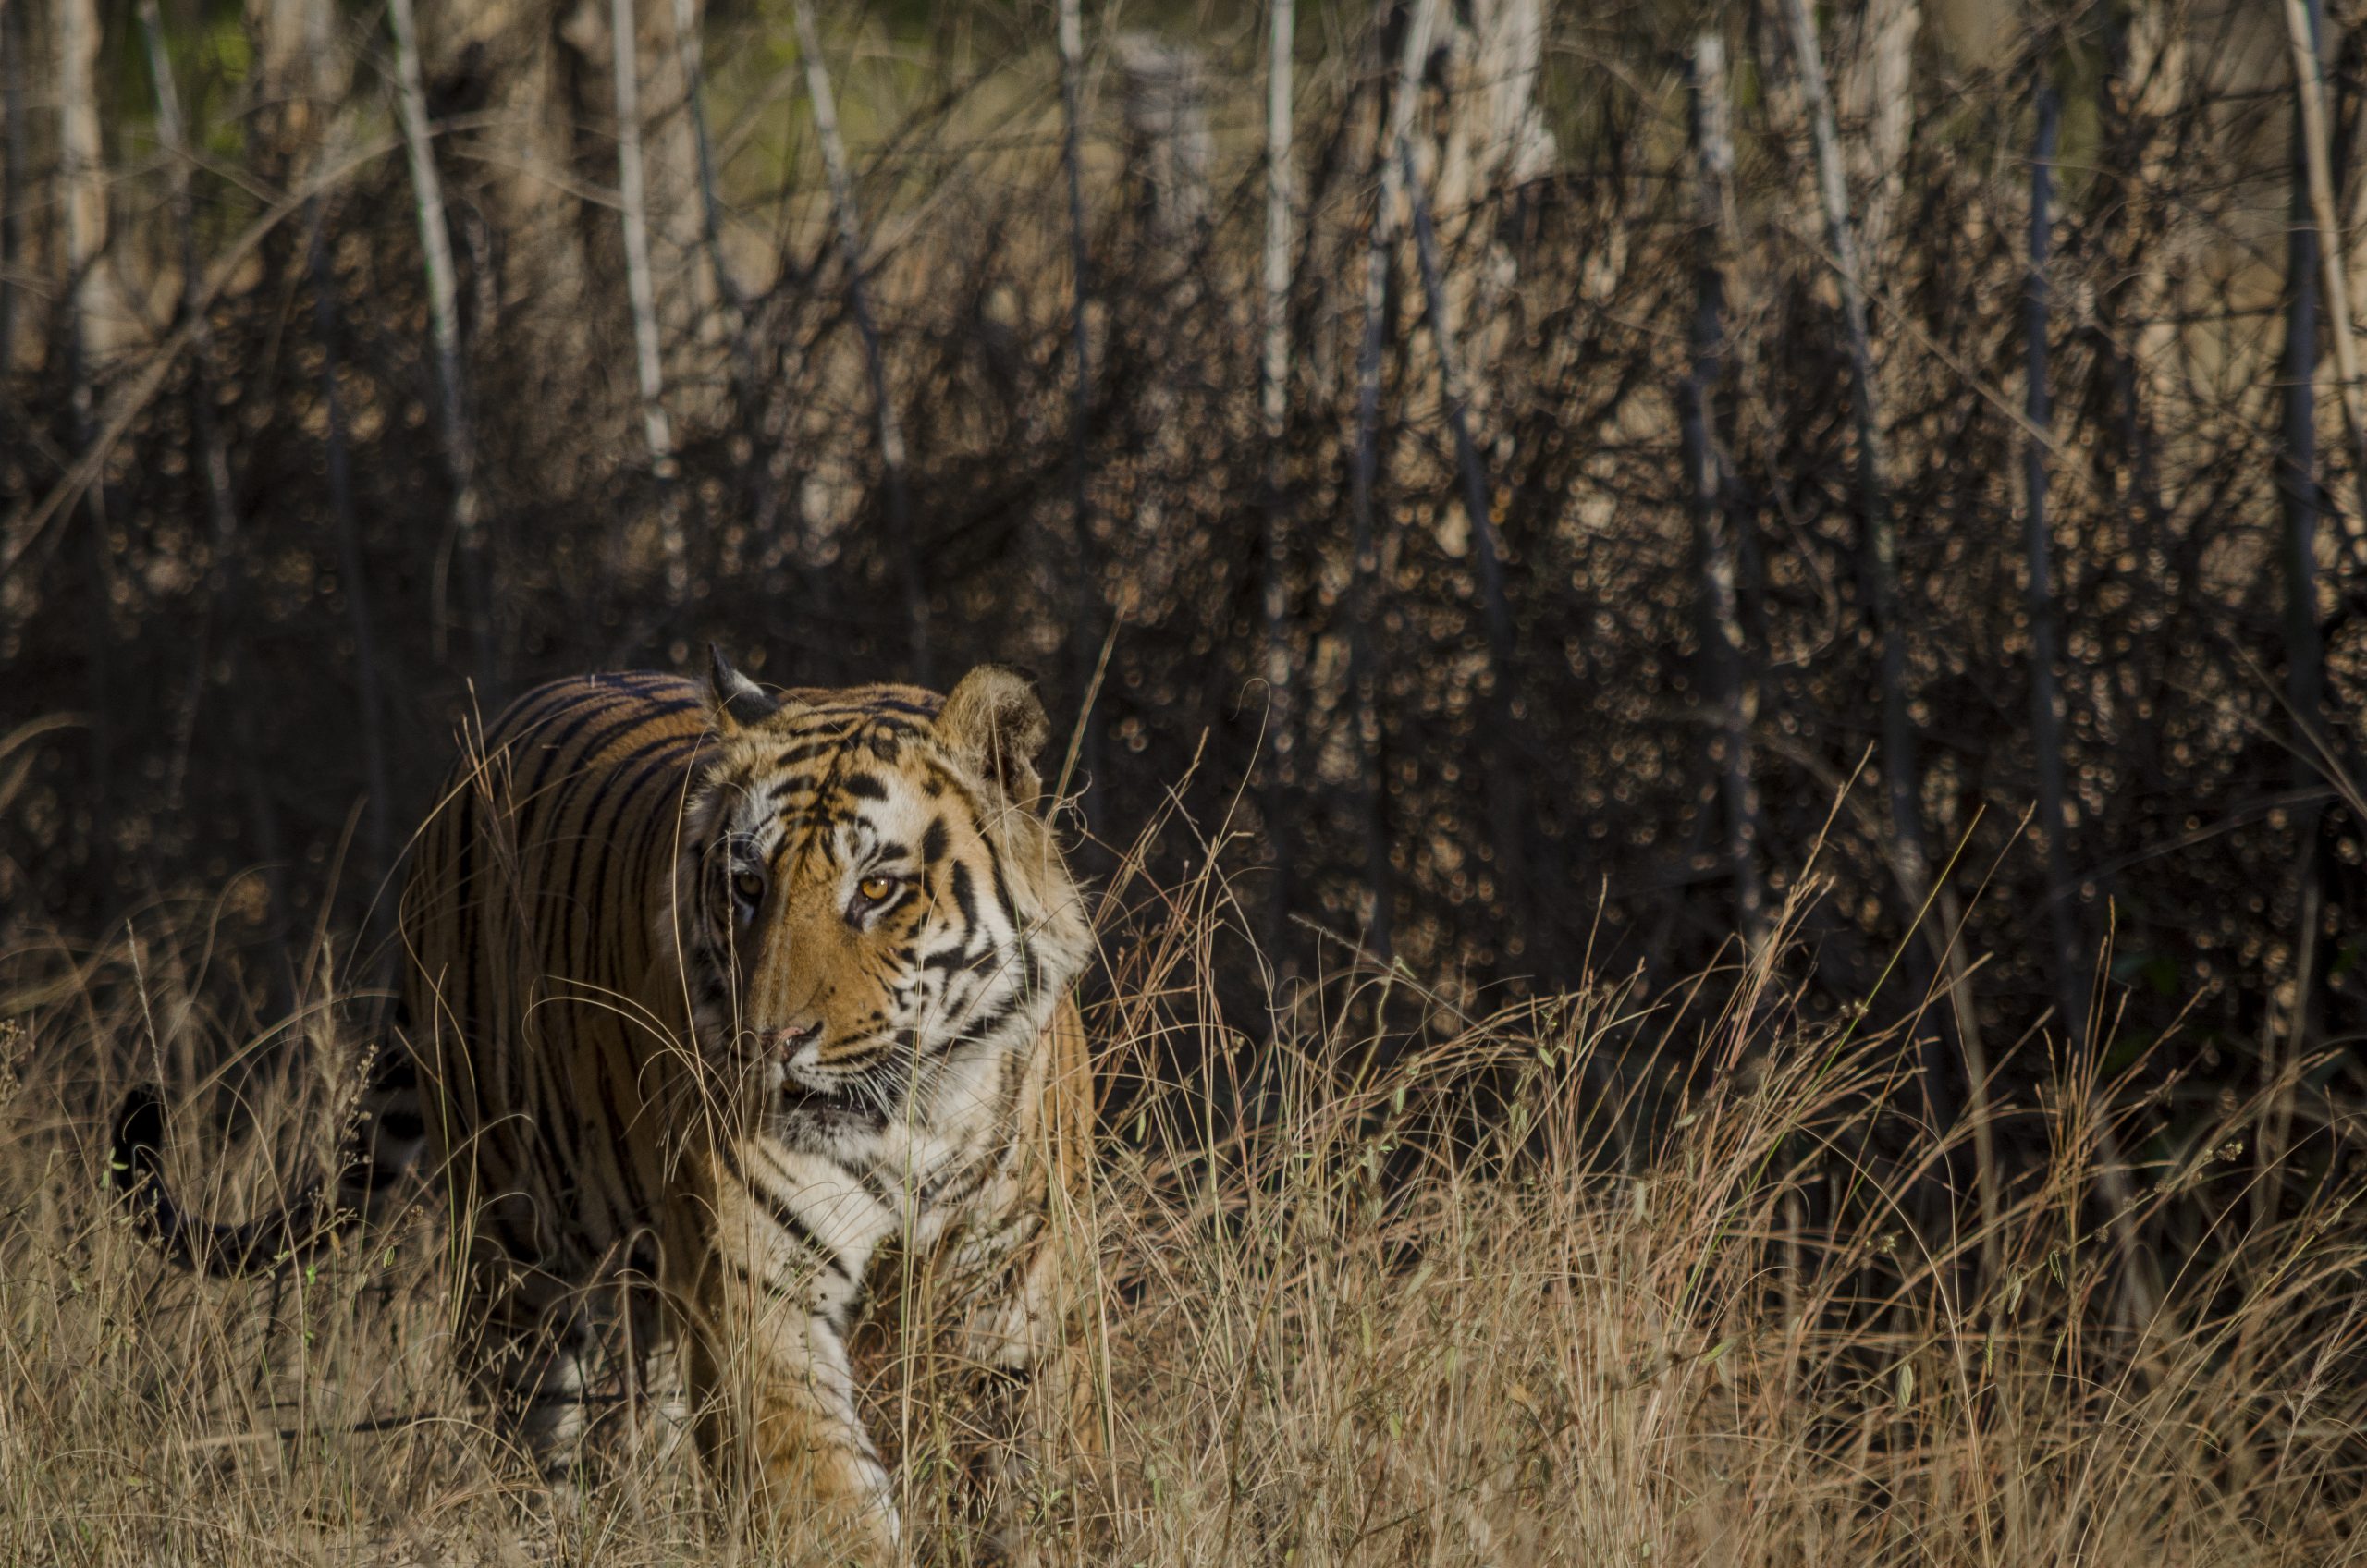 Wild Tiger in India